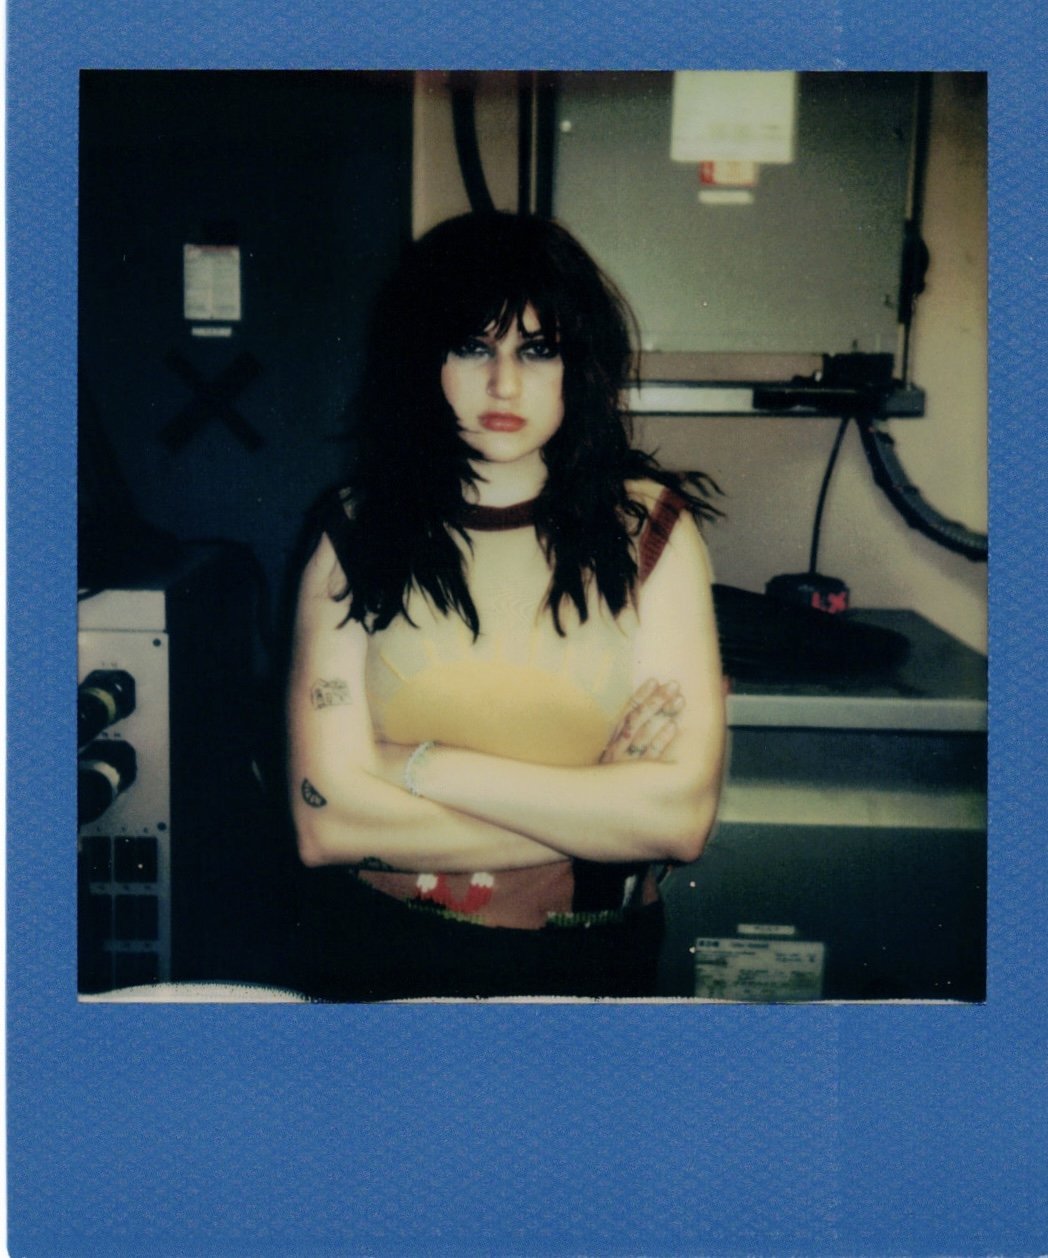  Gayle at the Warehouse in Houston Texas on her Scared but Trying tour. Photographer Landon Coats    polaroid summer film 